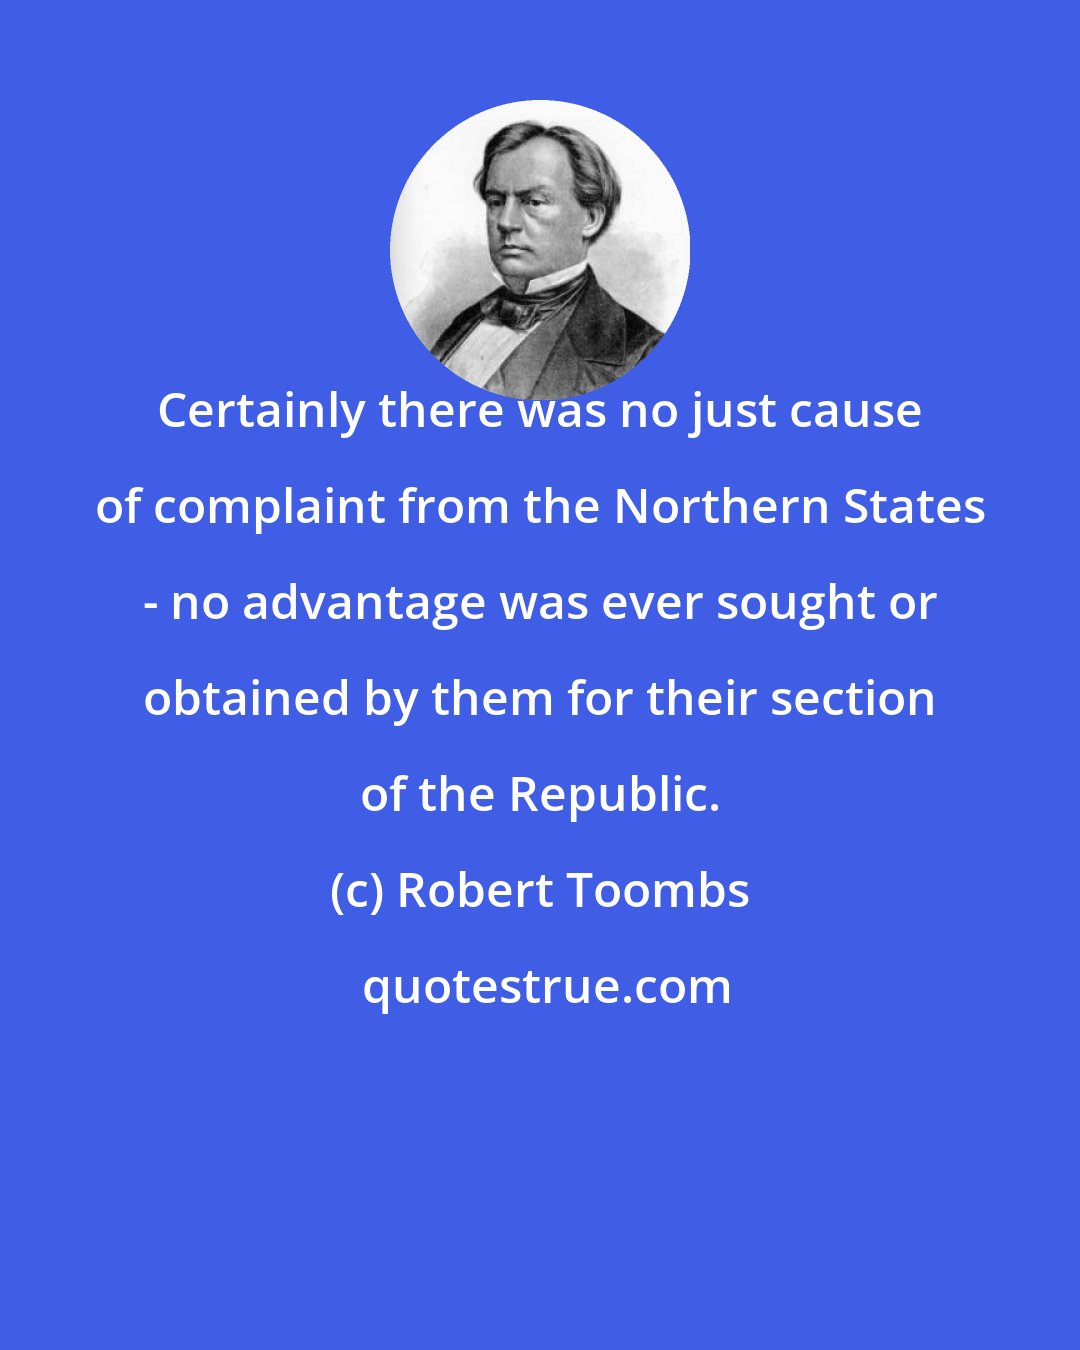 Robert Toombs: Certainly there was no just cause of complaint from the Northern States - no advantage was ever sought or obtained by them for their section of the Republic.